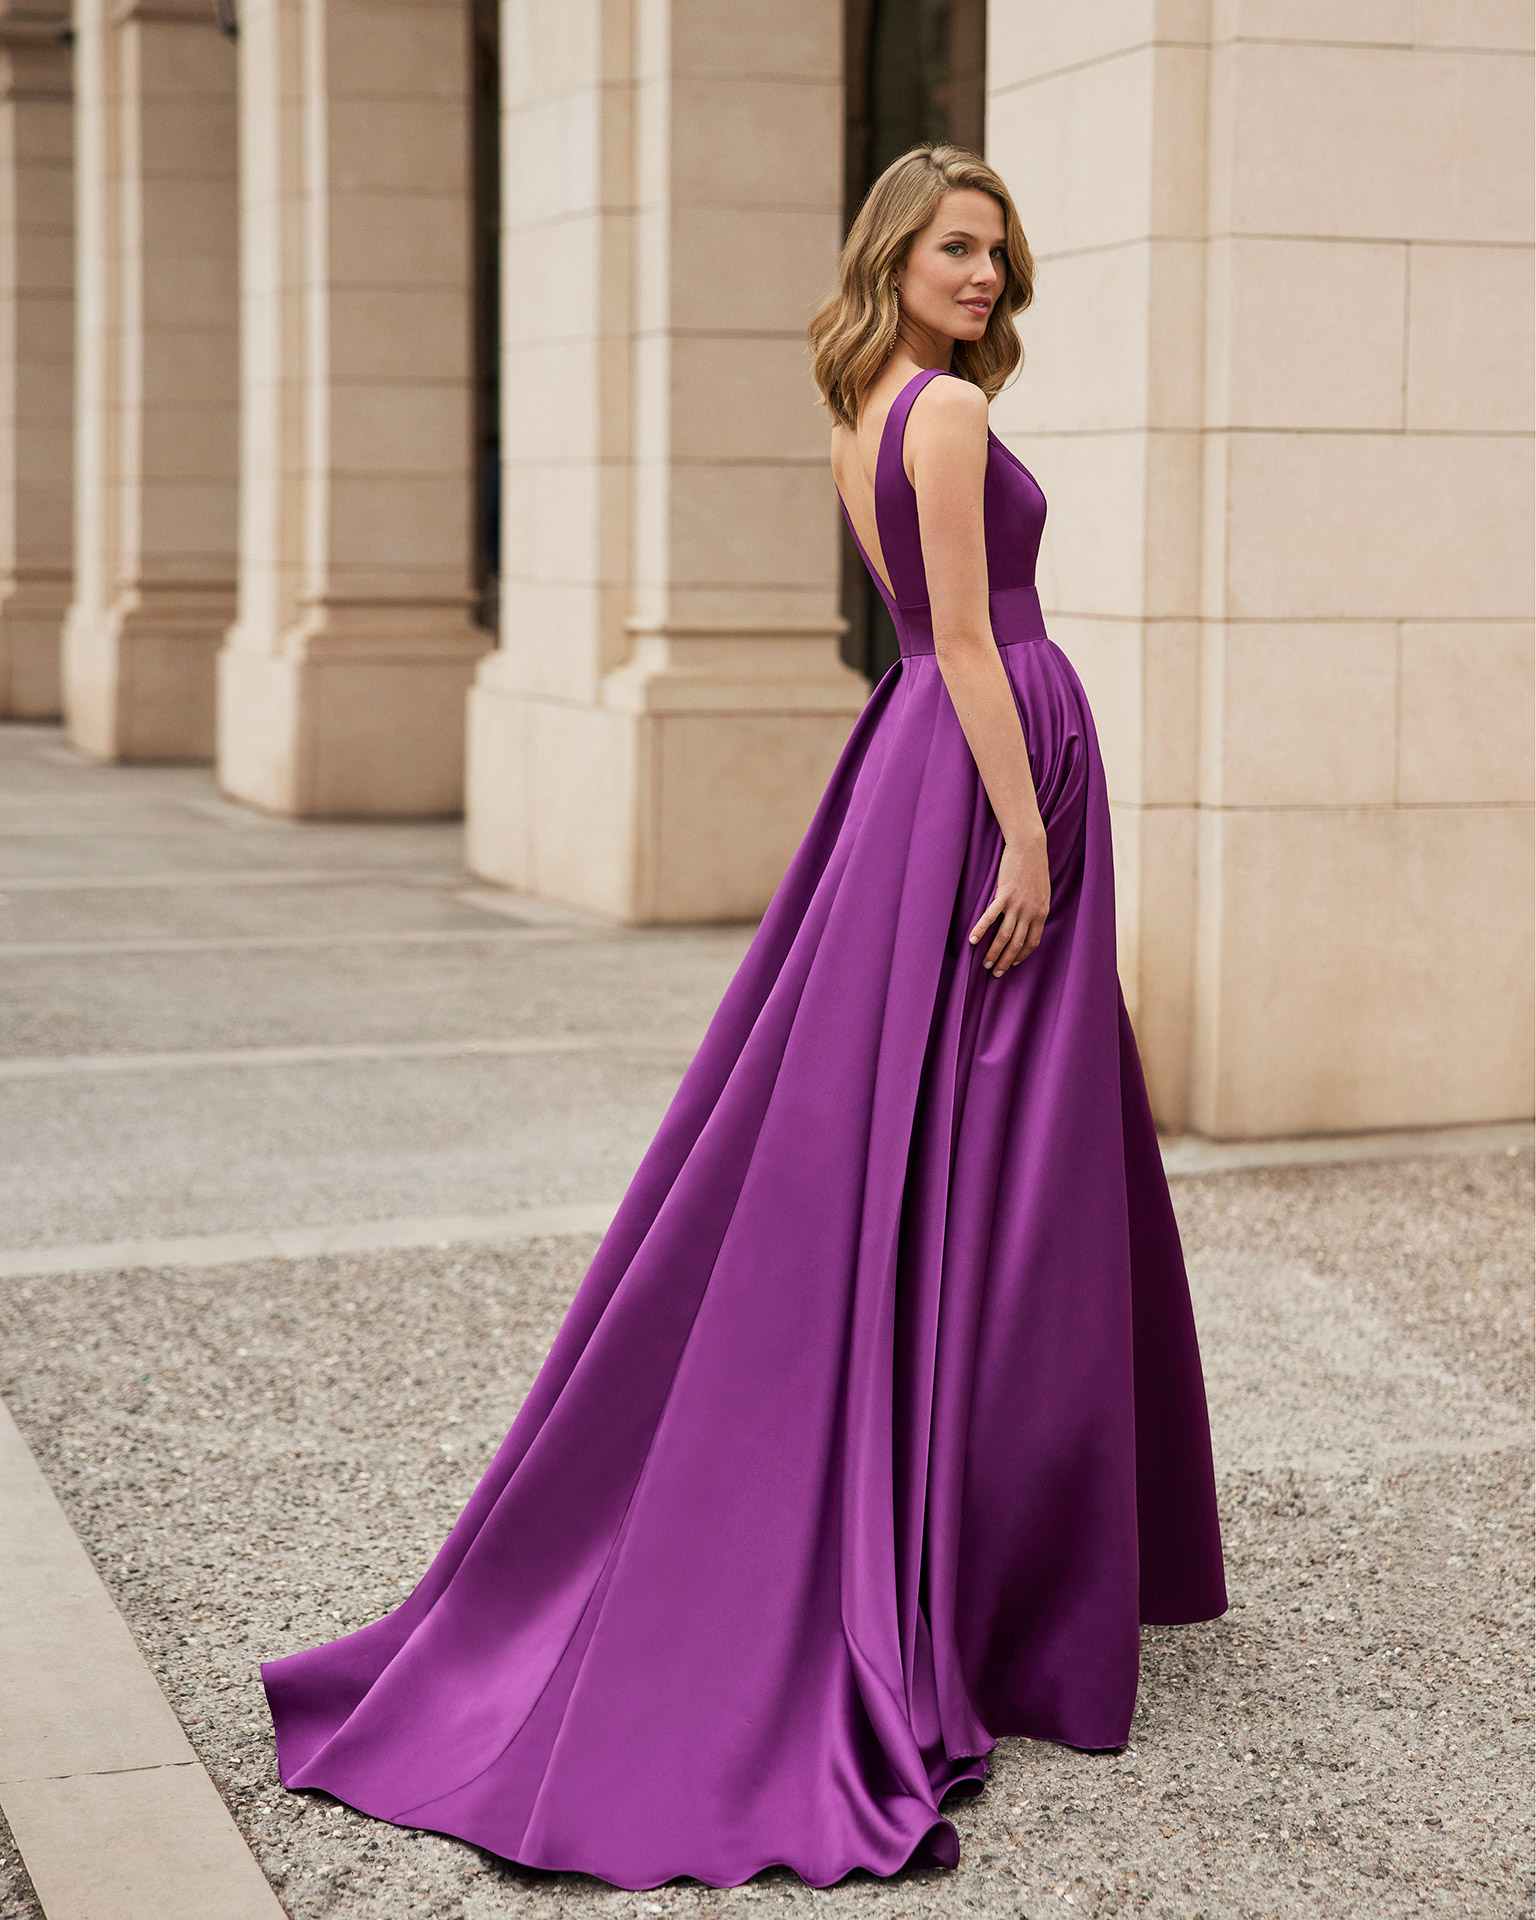 Long evening dress made of satin. Marfil Barcelona design with a V-neckline, and a pleated skirt with a slit. MARFIL_BARCELONA.